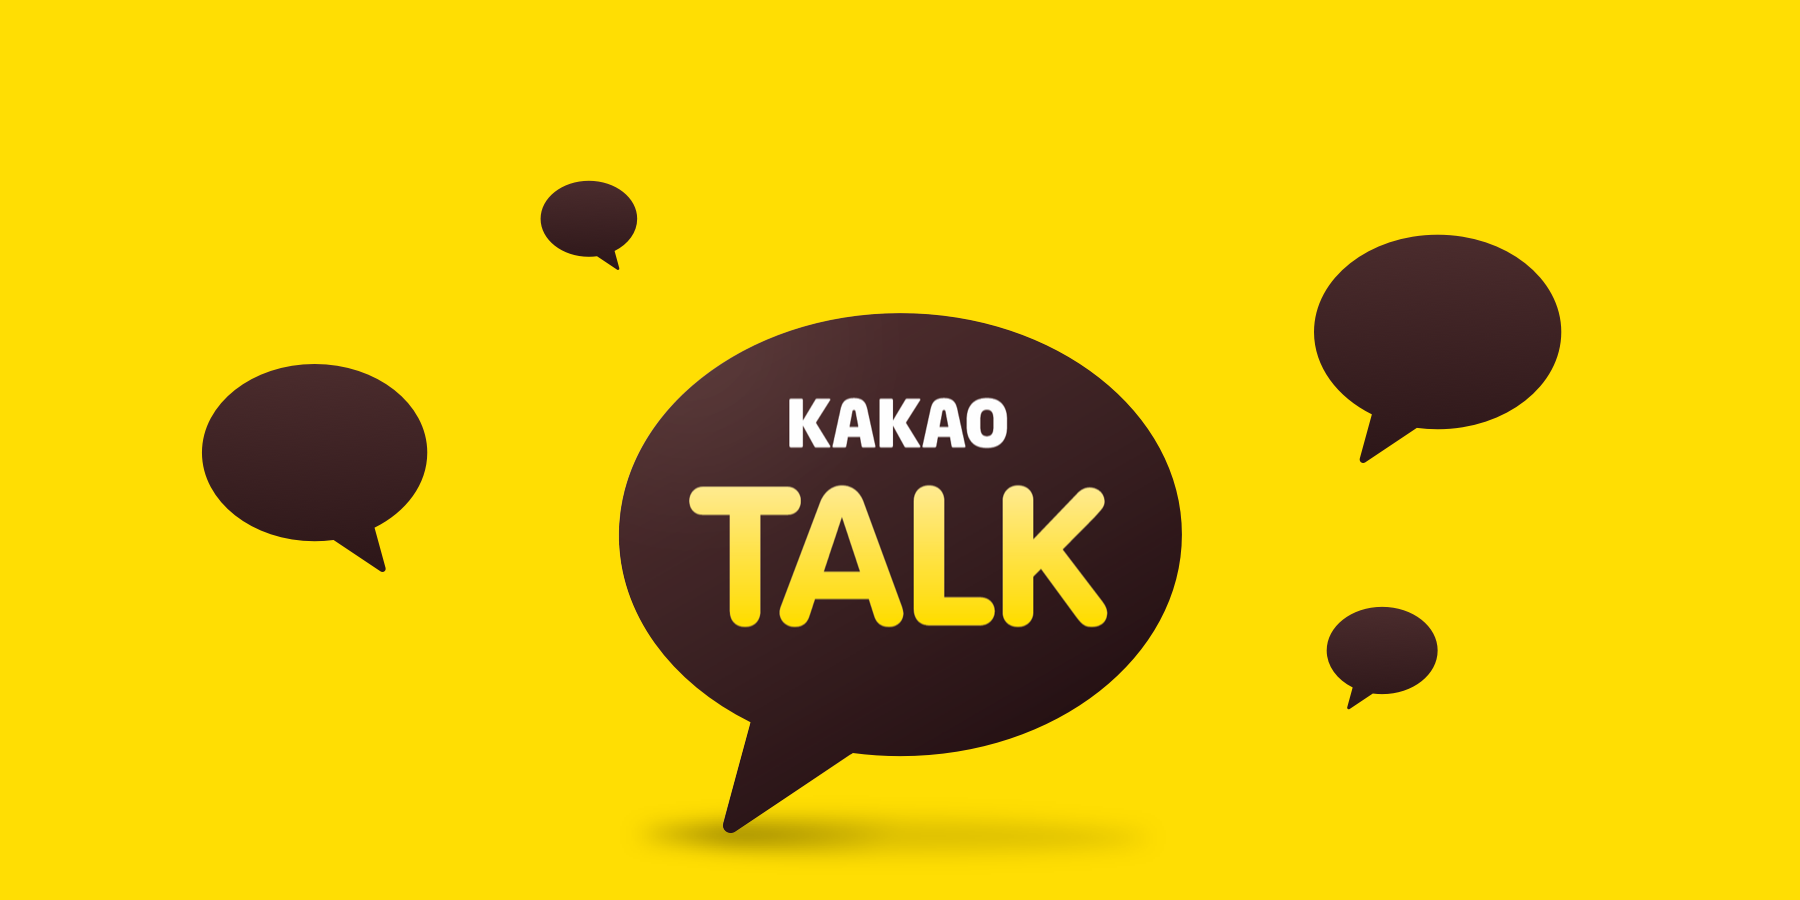 kakaotalk free download for pc